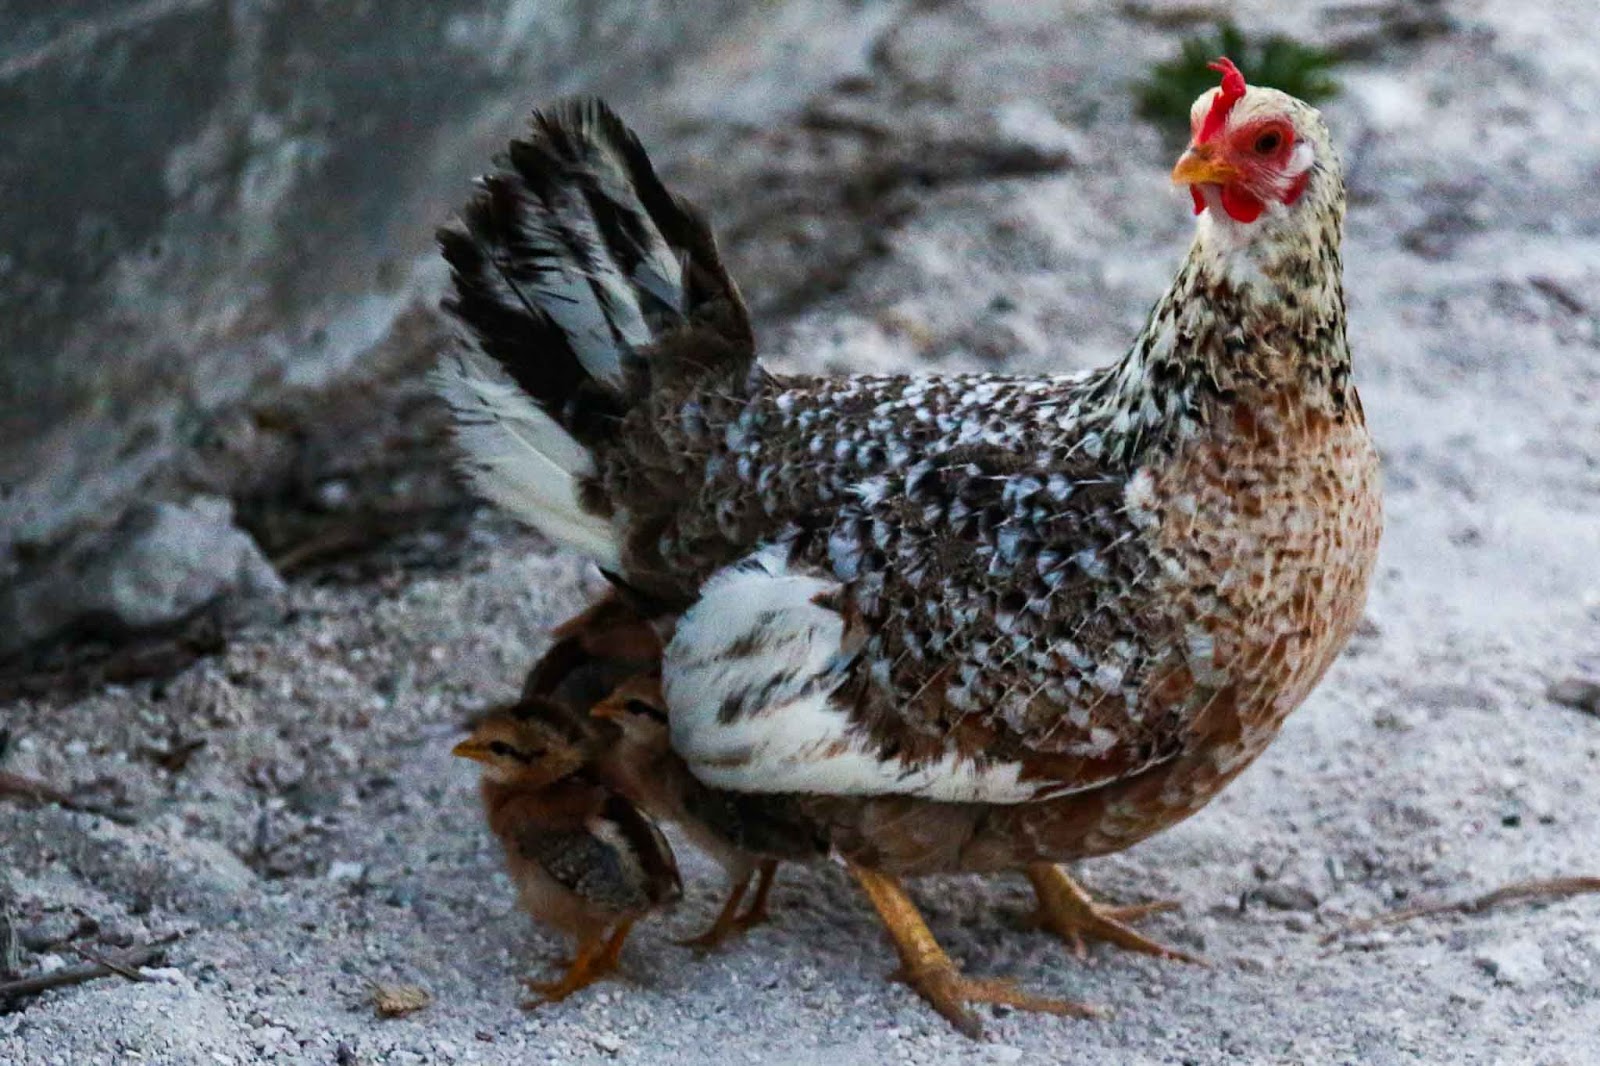 A mother hen with her chicks by Higgs Beach, which is a must stop in Key West on a budget.